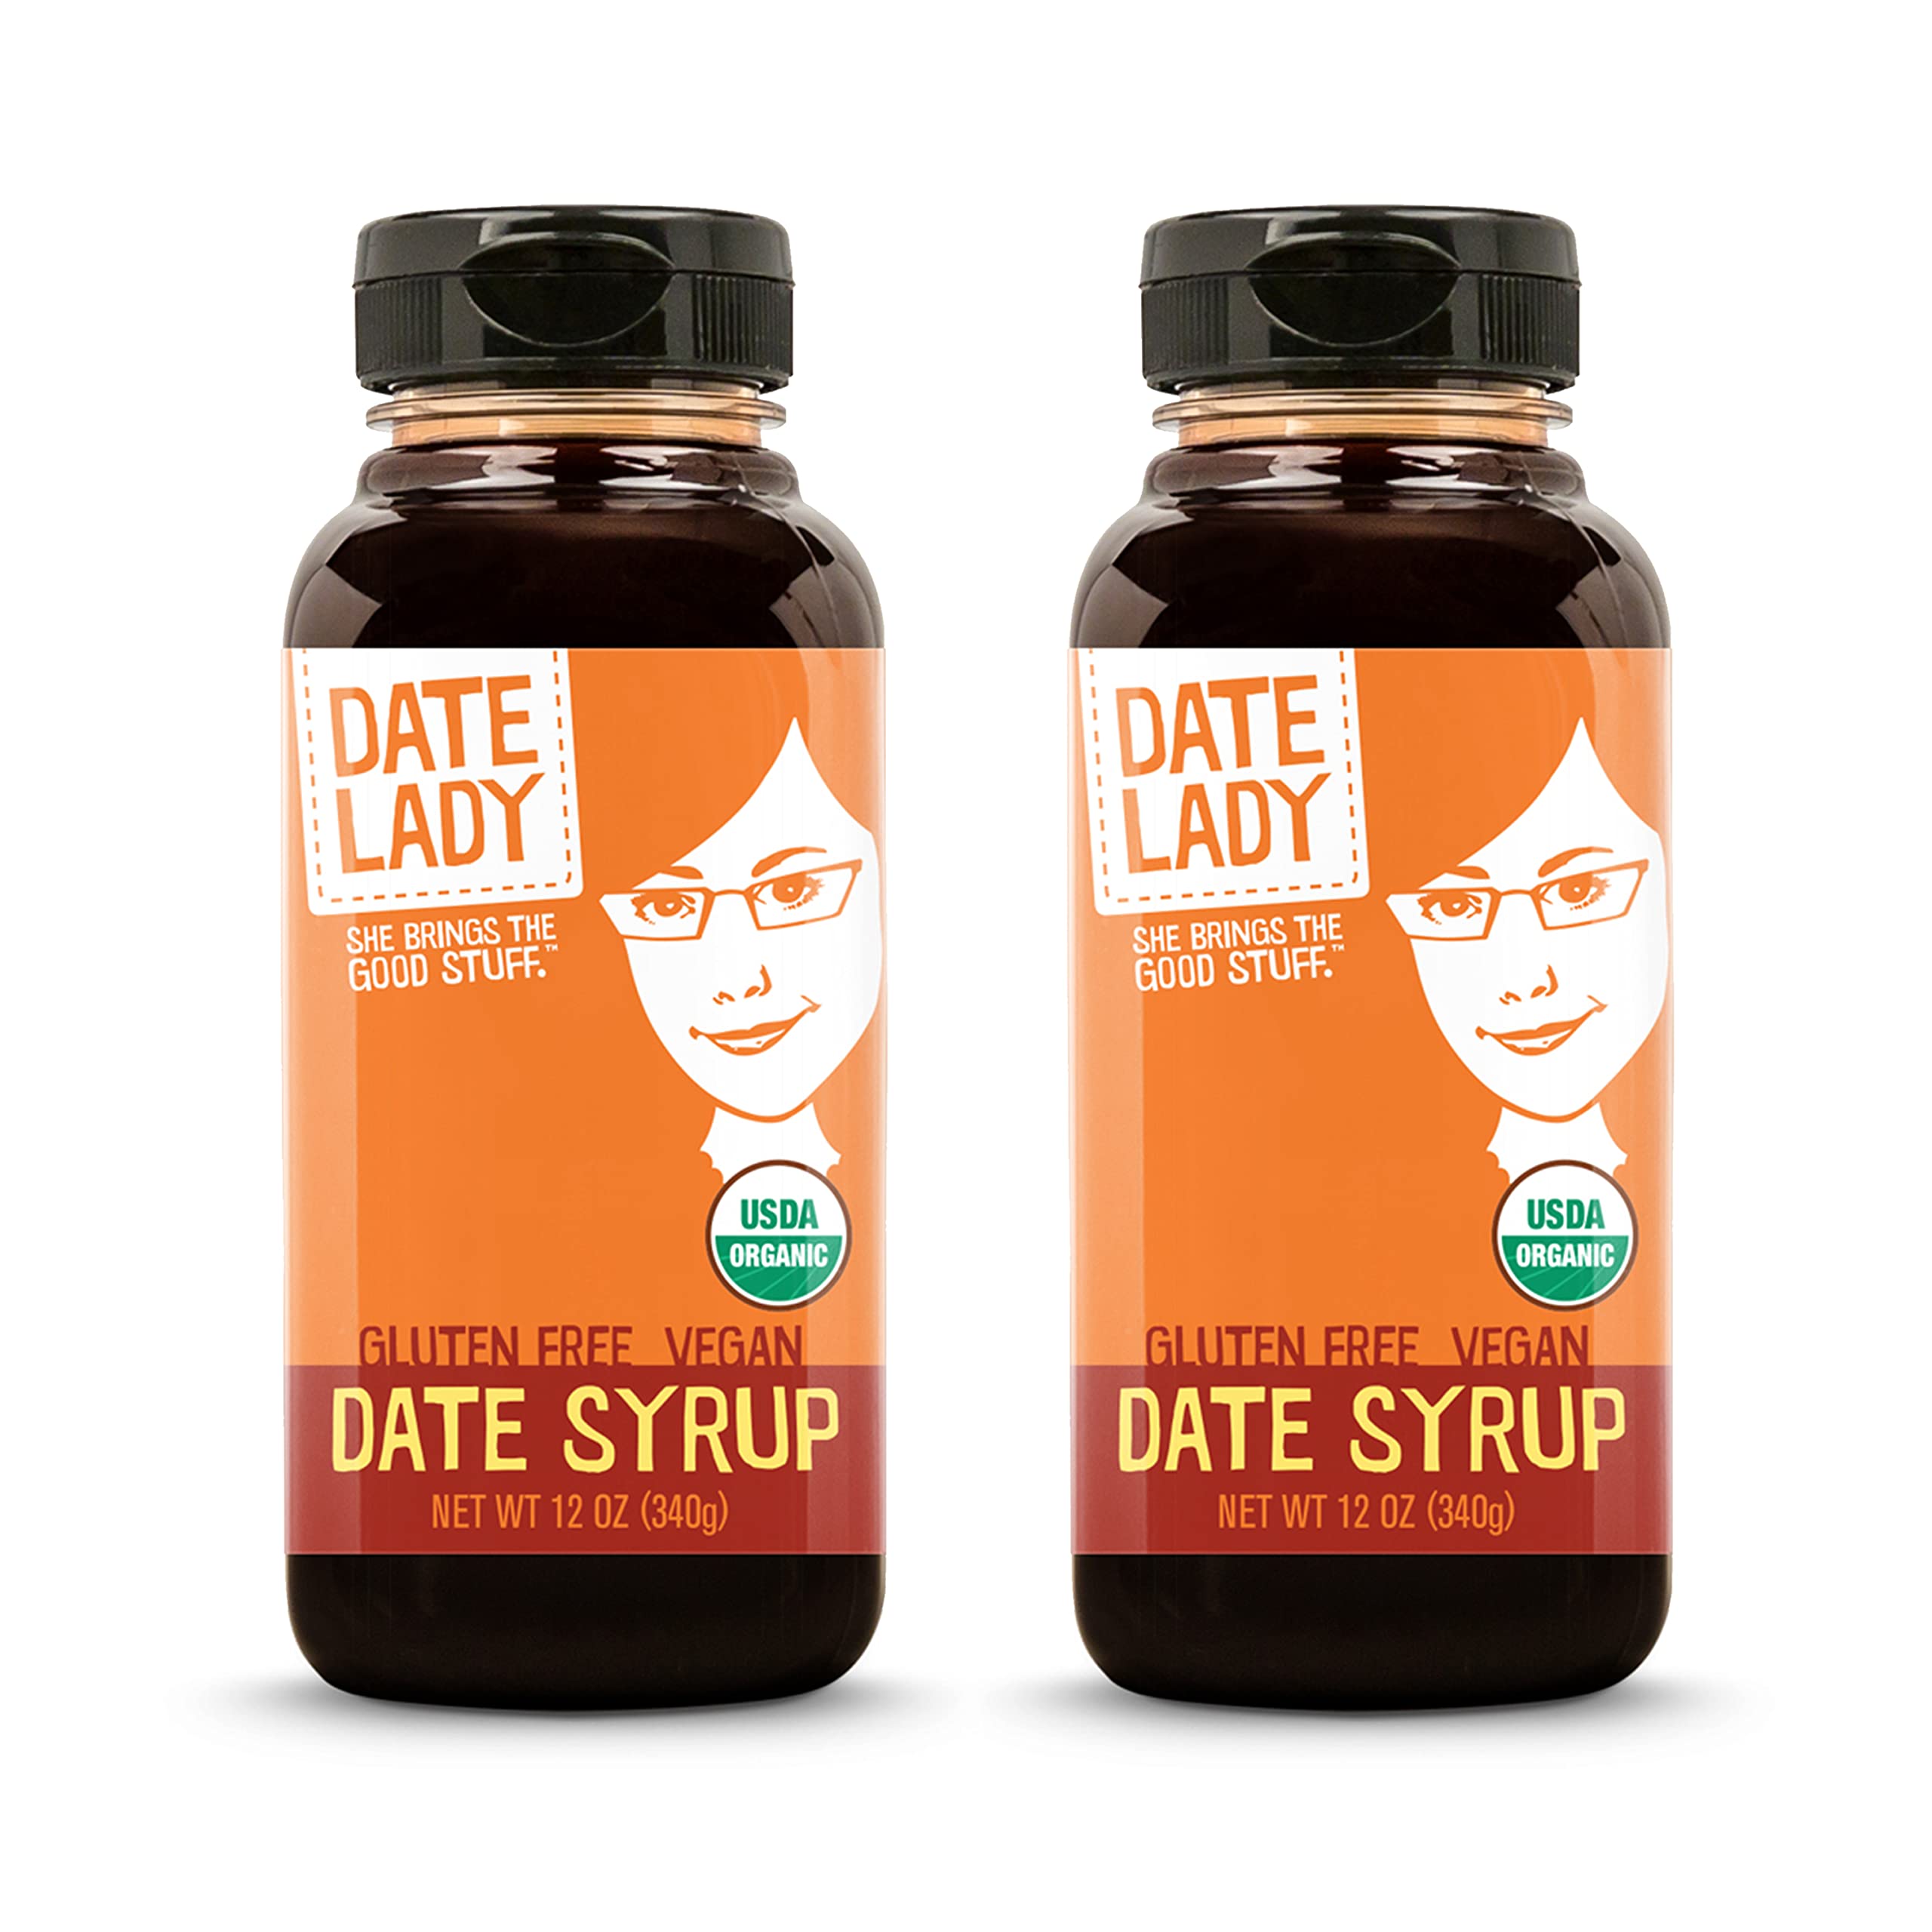 Delicious Date Syrup